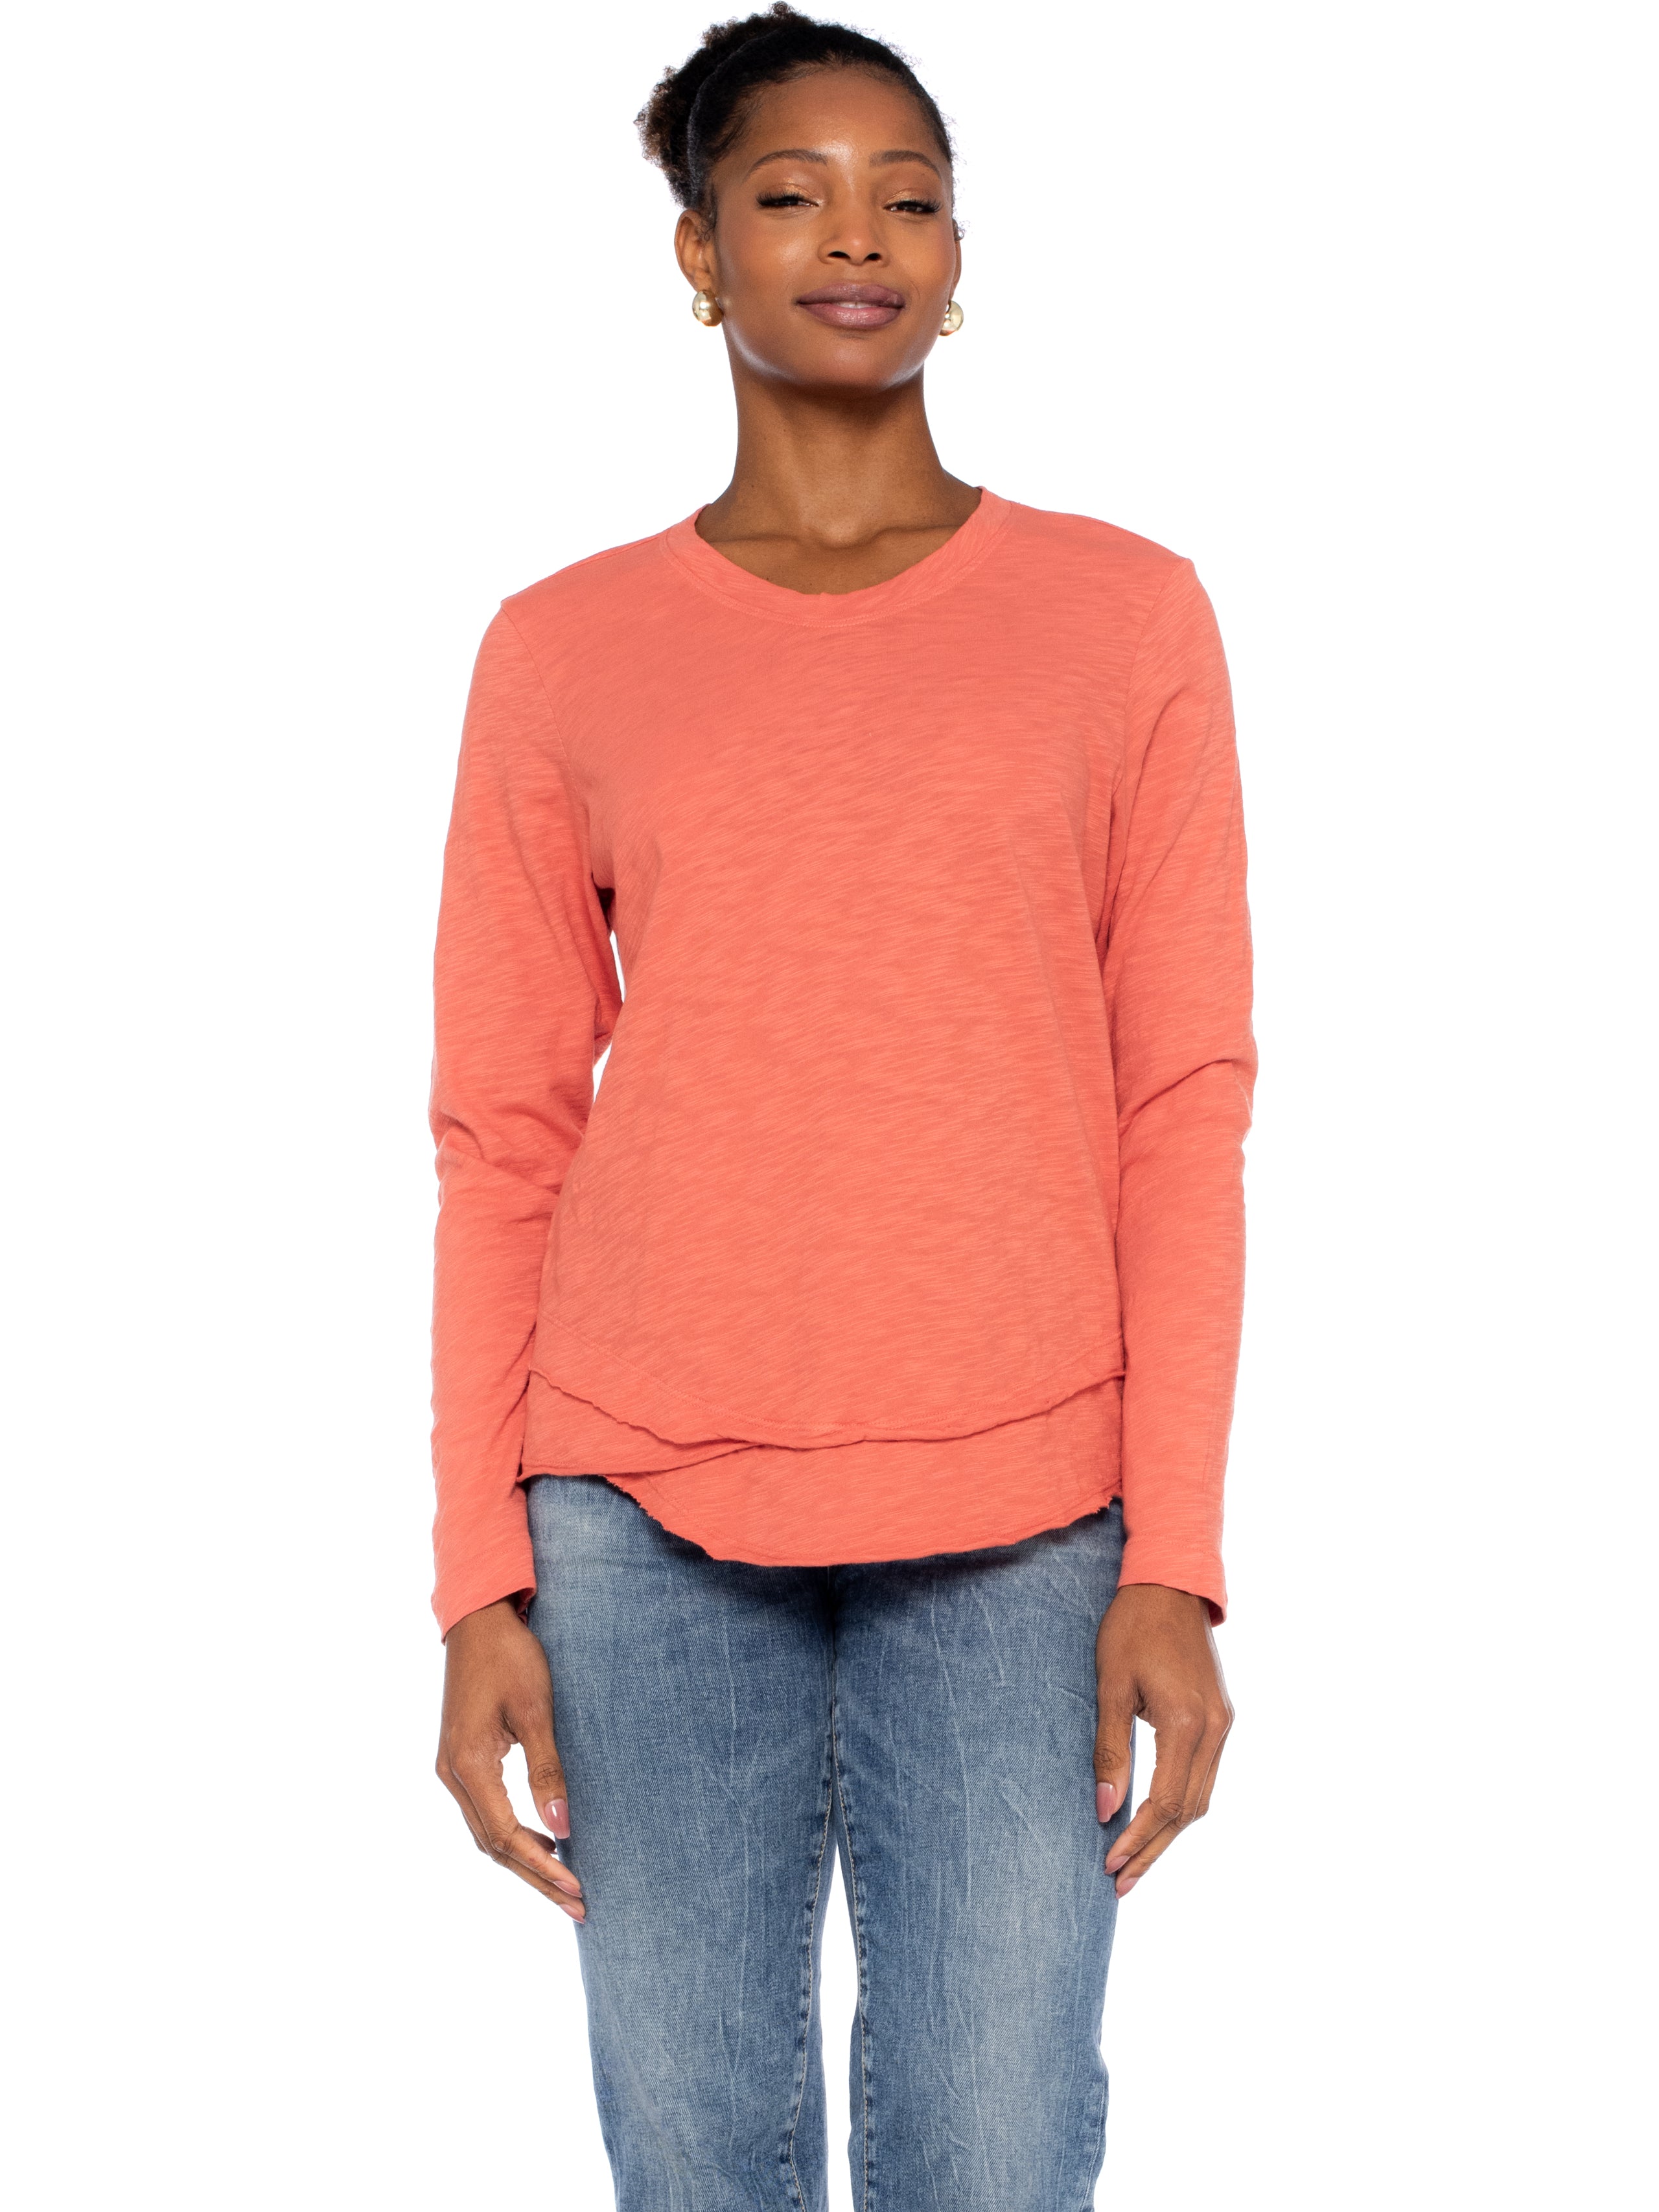 Long Sleeve Tops, Tops with Sleeves